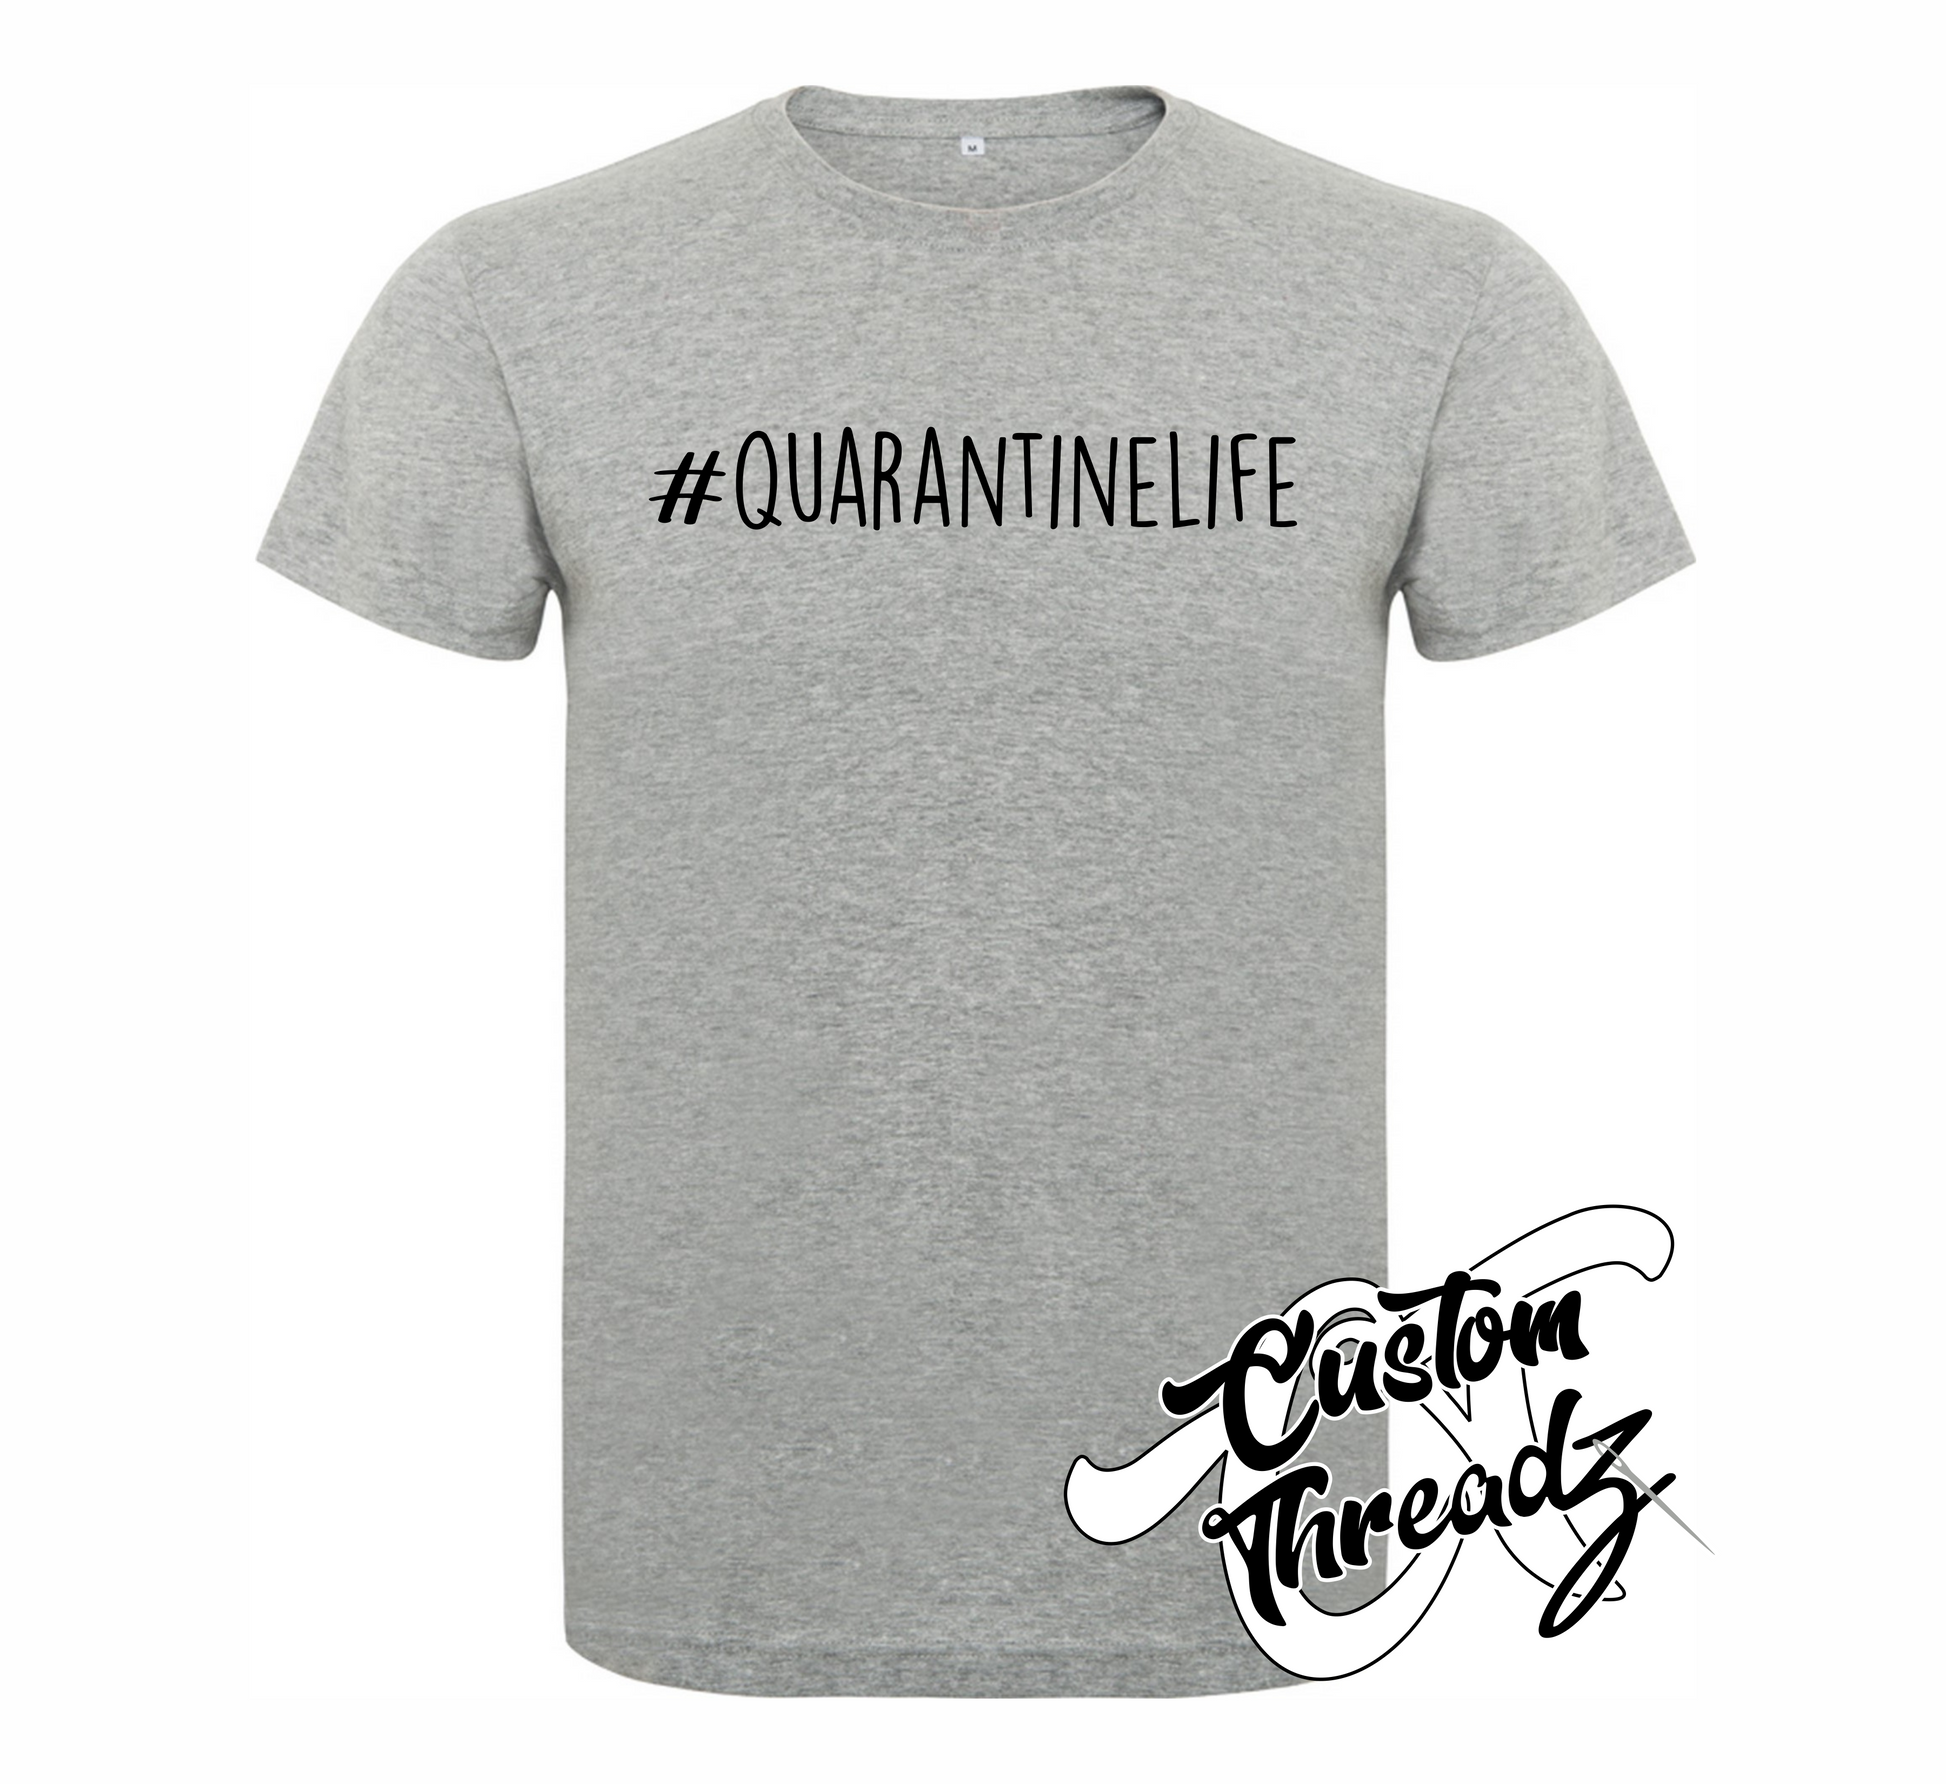 athletic heather tee with # quarantine life DTG printed design